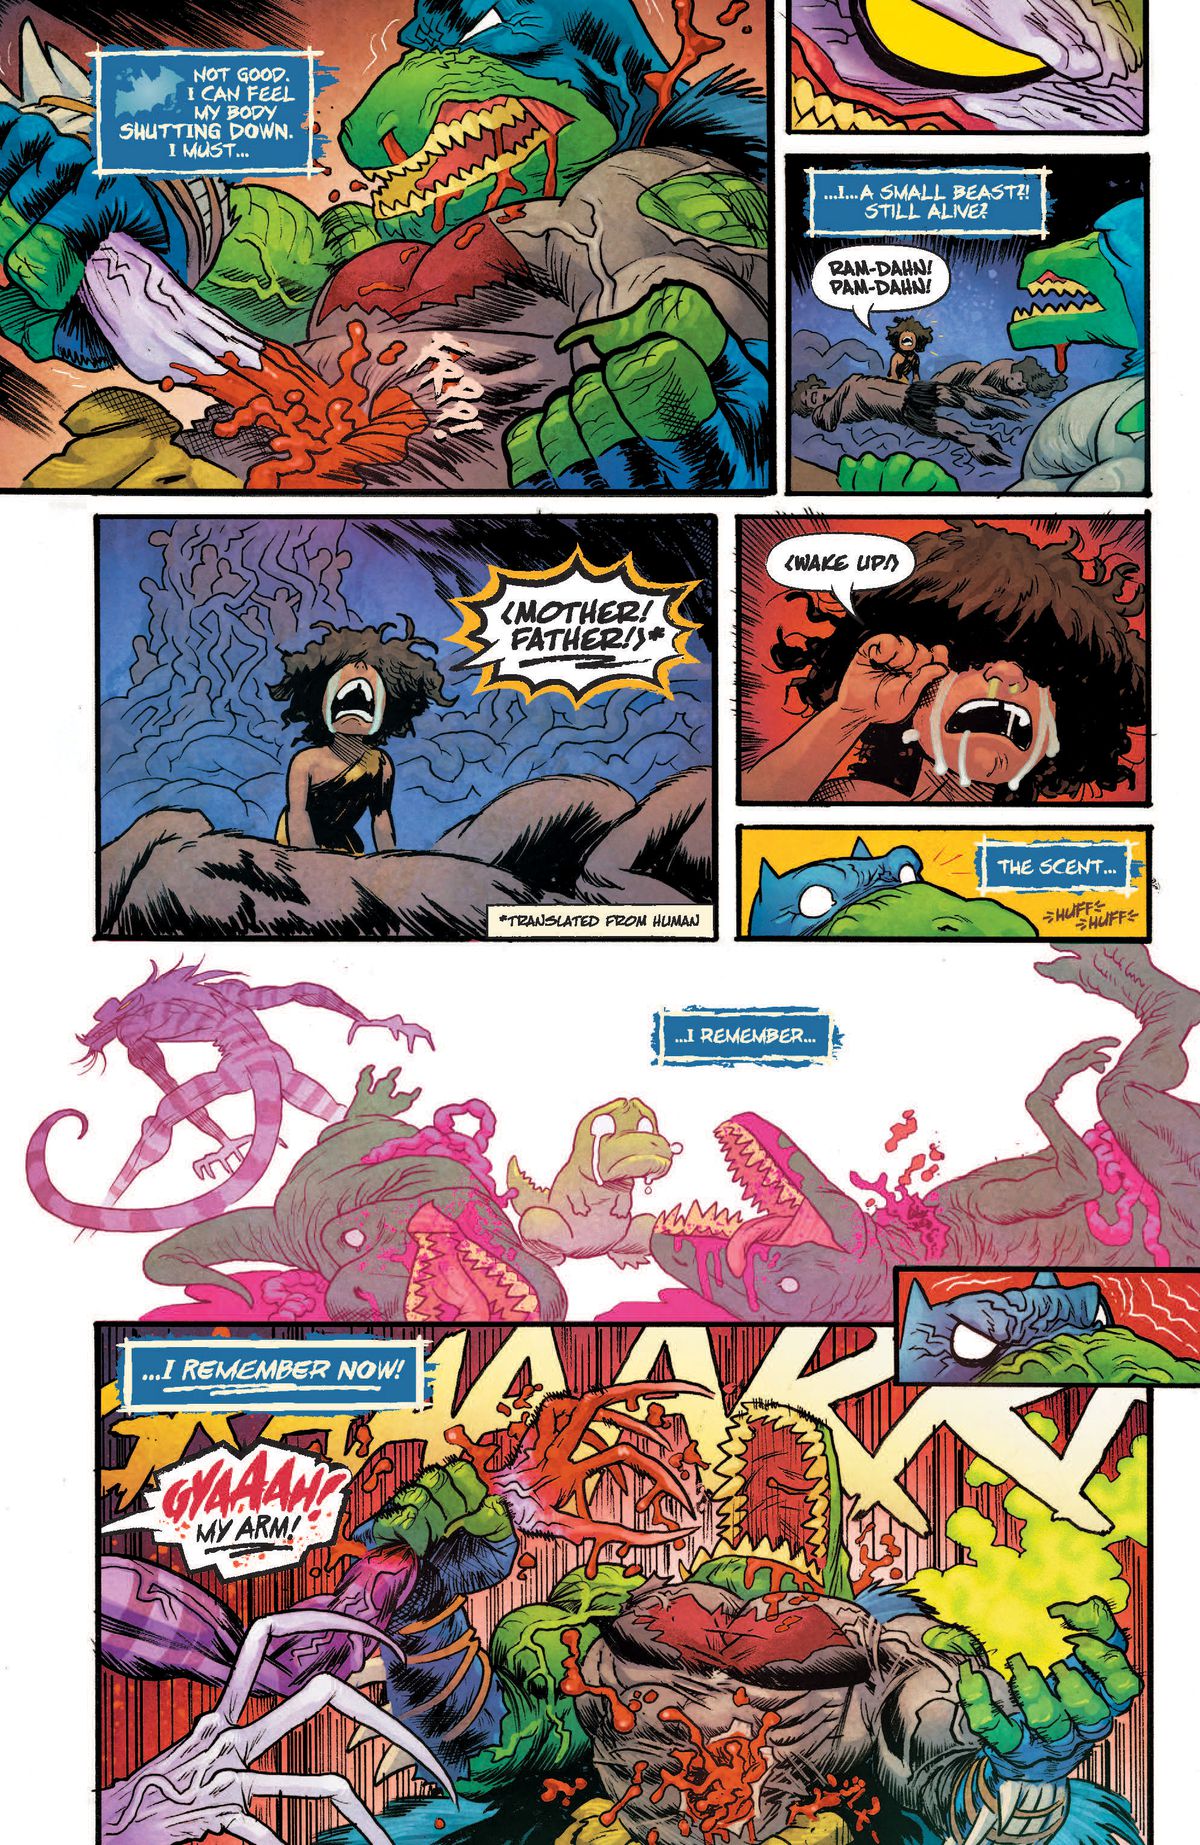 In the midst of battle with Jokerzard, Batsaur sees a small human child crying over its dead parents, and has a flashback to his origin story. The panel depicts two eviscerated adult allosauruses in a gruesome and humorous way, with Jokerzard slinking away in the background. A very small and more cartoony Batsaur sits between his dead parents, crying huge tears from his huge cute eyes. “I remember,” thinks Batsaur, “I remember now!” in Jurassic League #1 (2022).